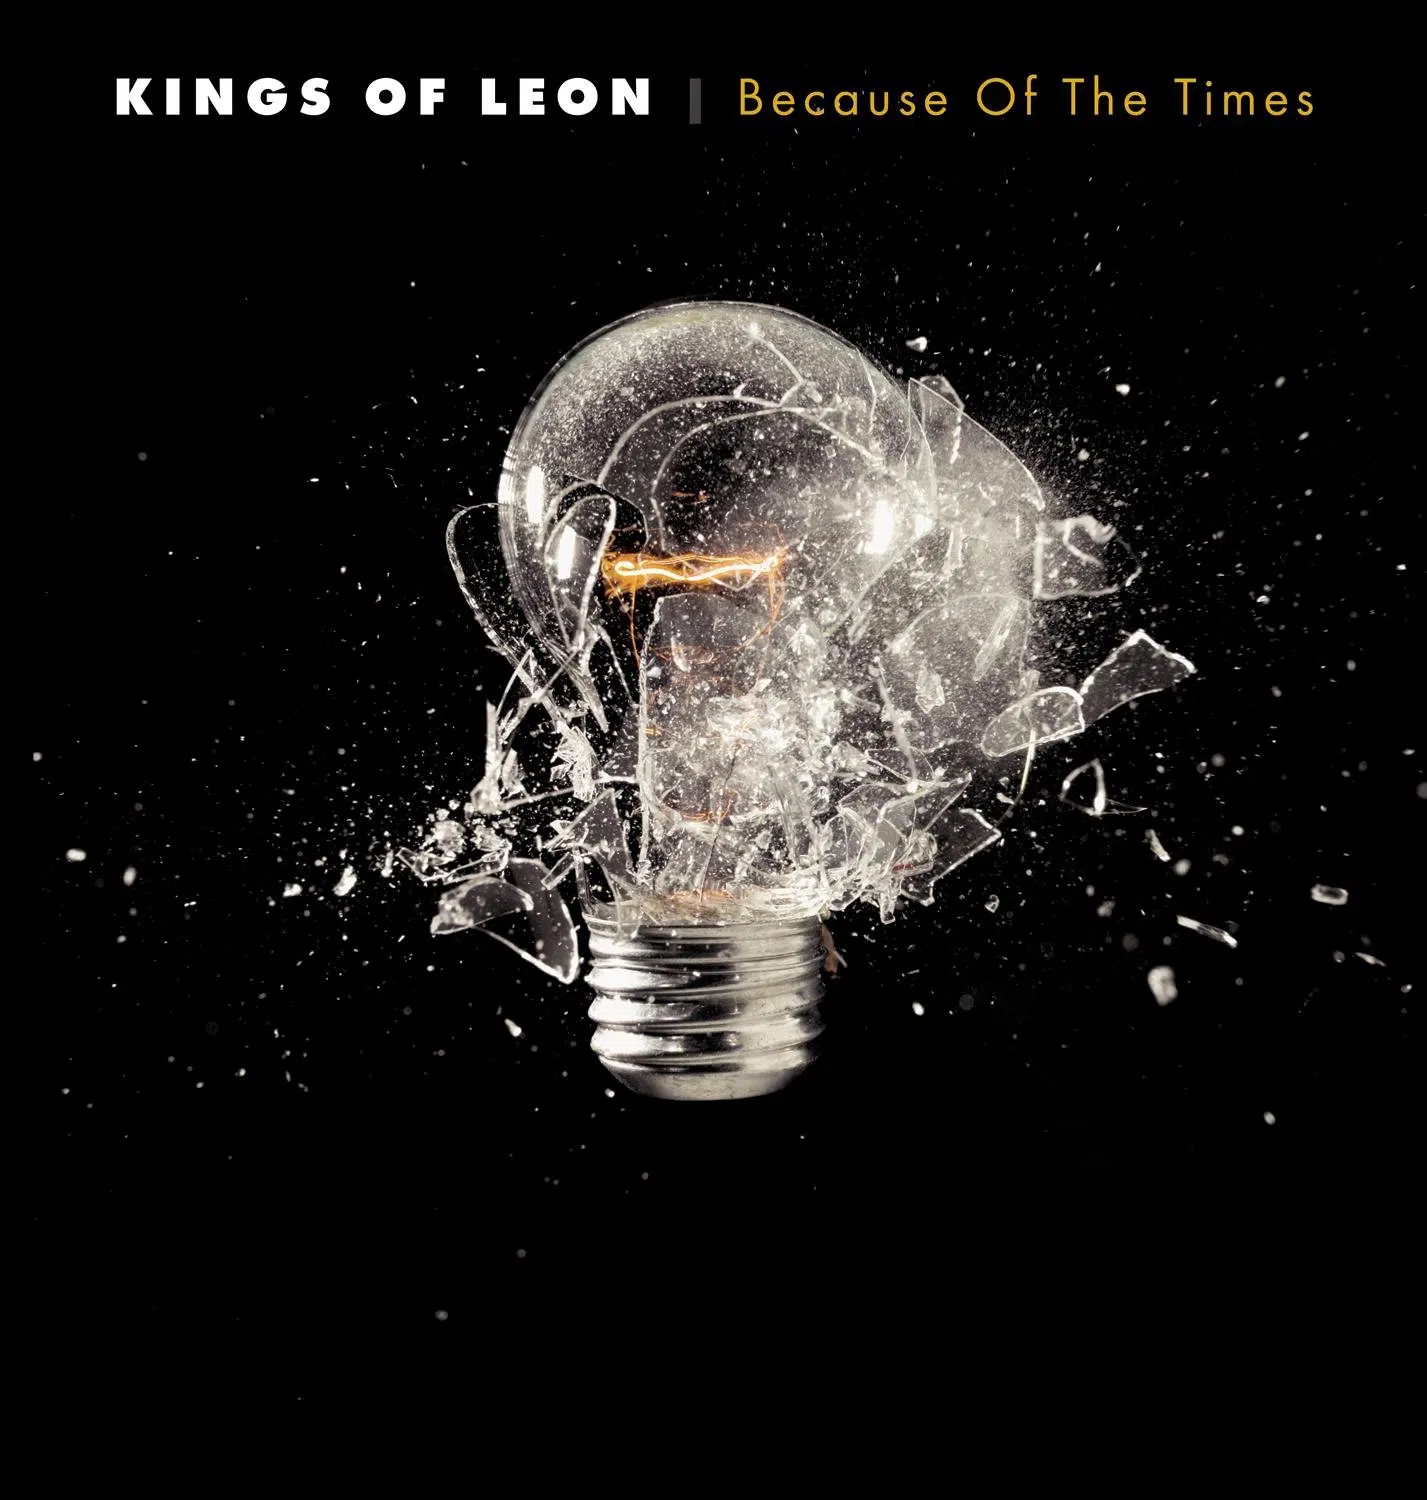 Kings of Leon Because of the Times